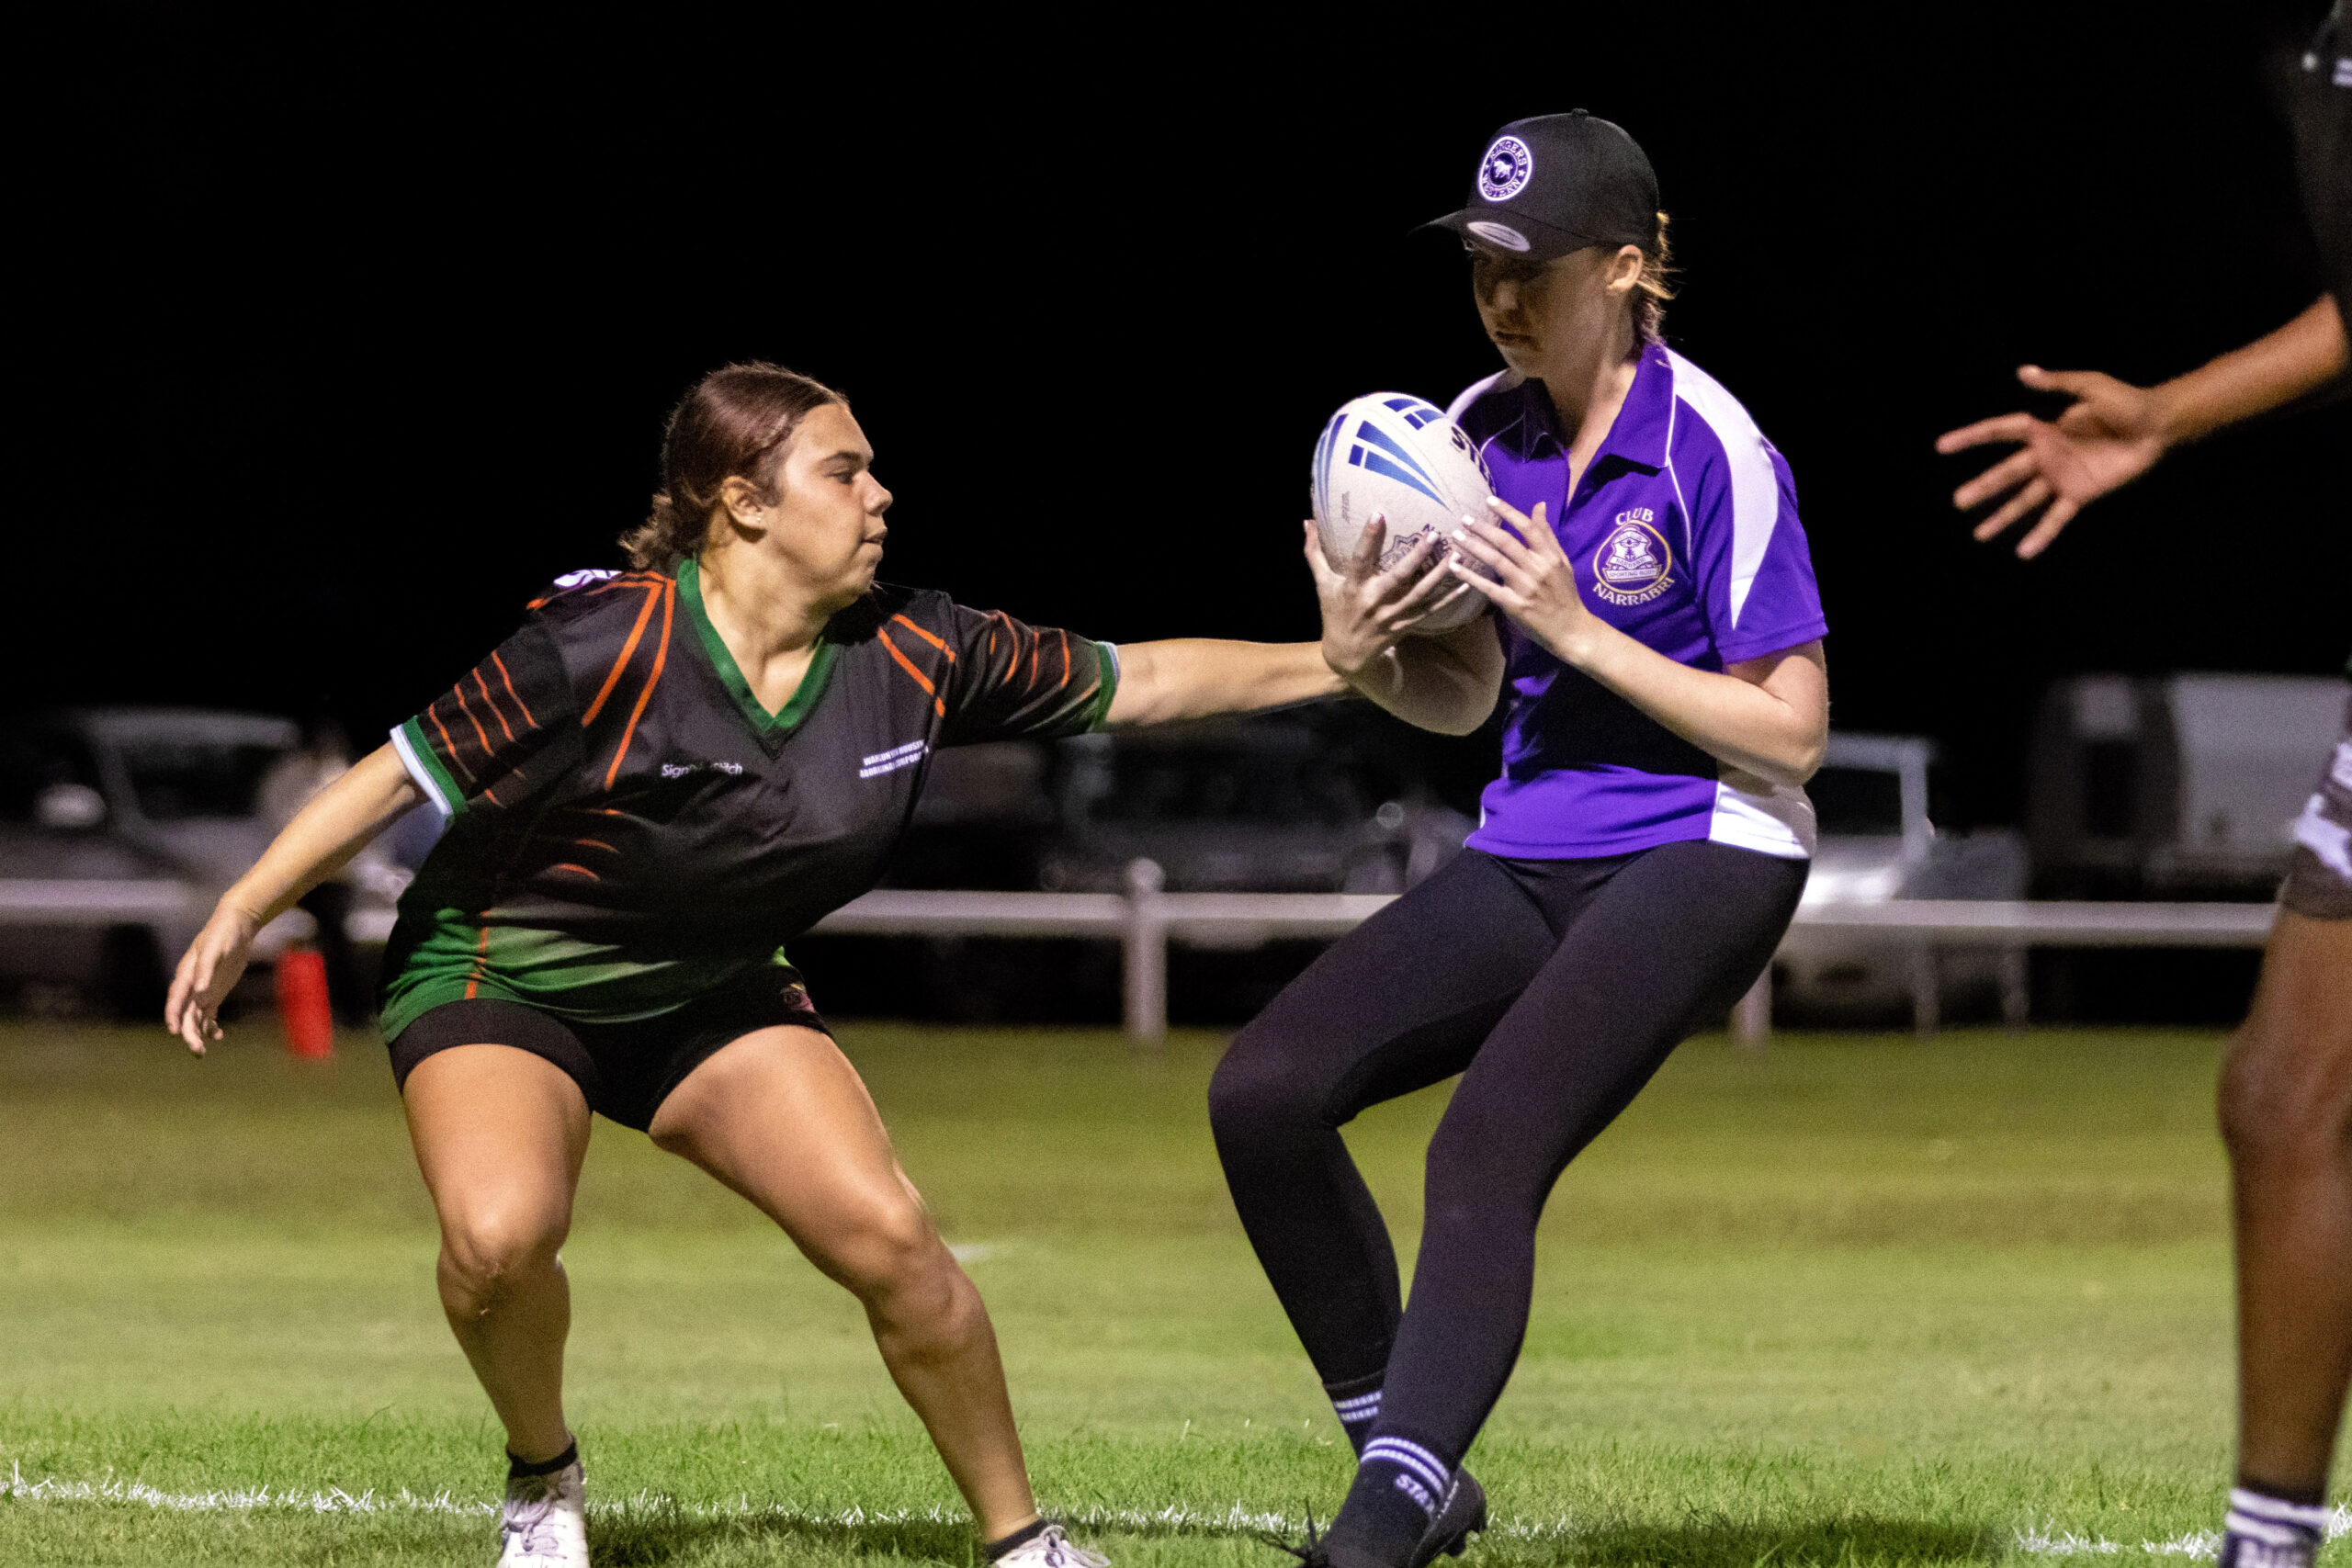 Narrabri Touch’s mixed competition resumes under lights